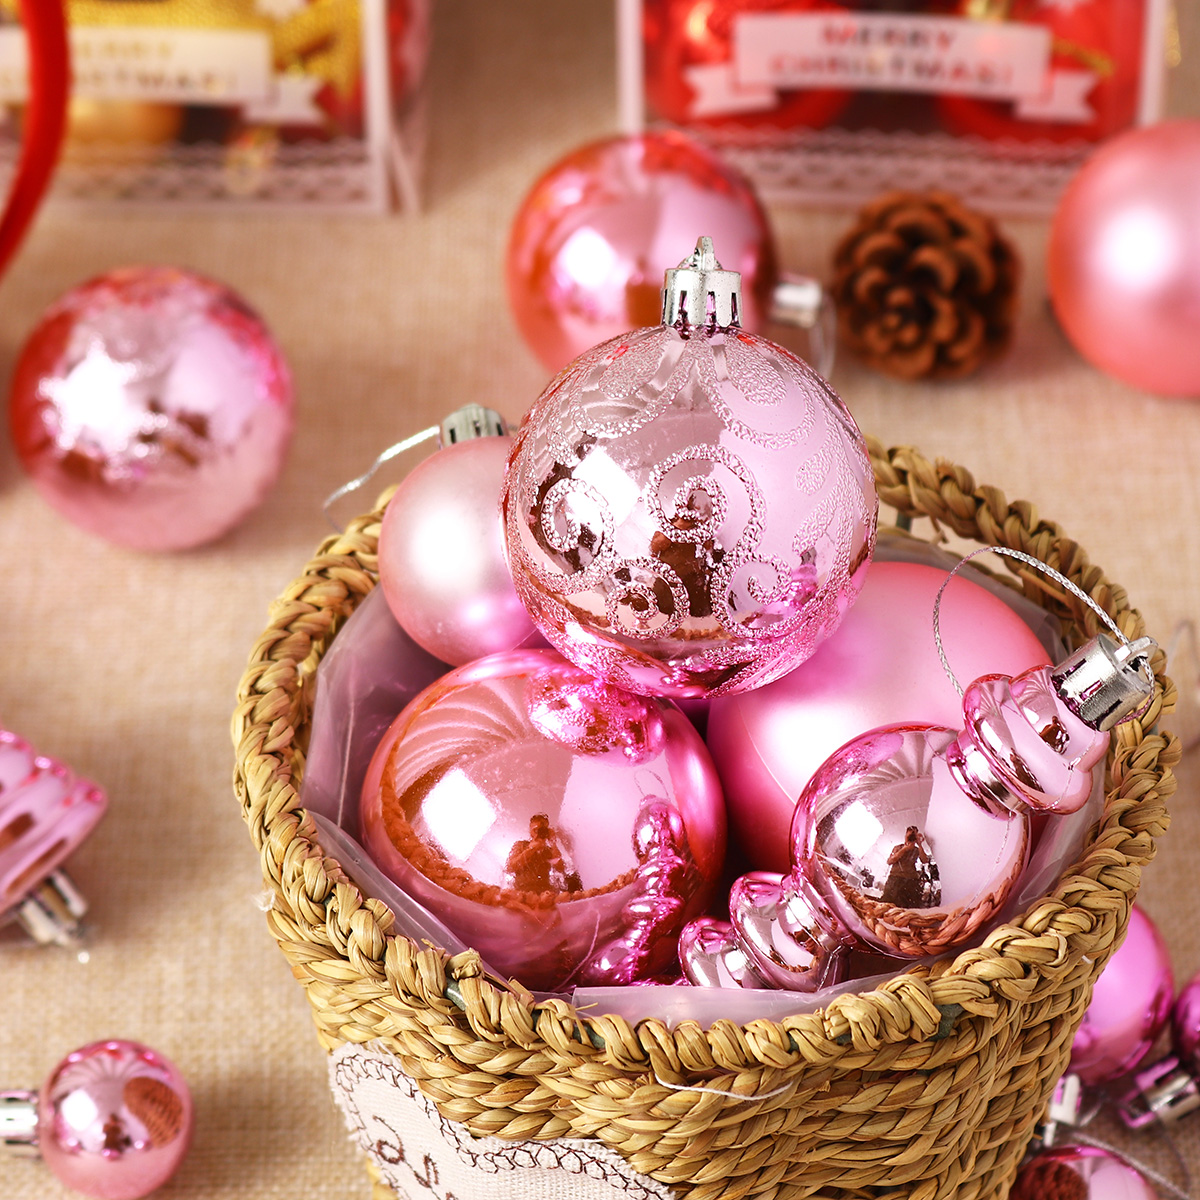 30-PcsSet-Glitter-Christmas-Tree-Ball-Baubles-Colorful-for-Xmas-Party-Home-Garden-Christmas-Decorati-1770980-7